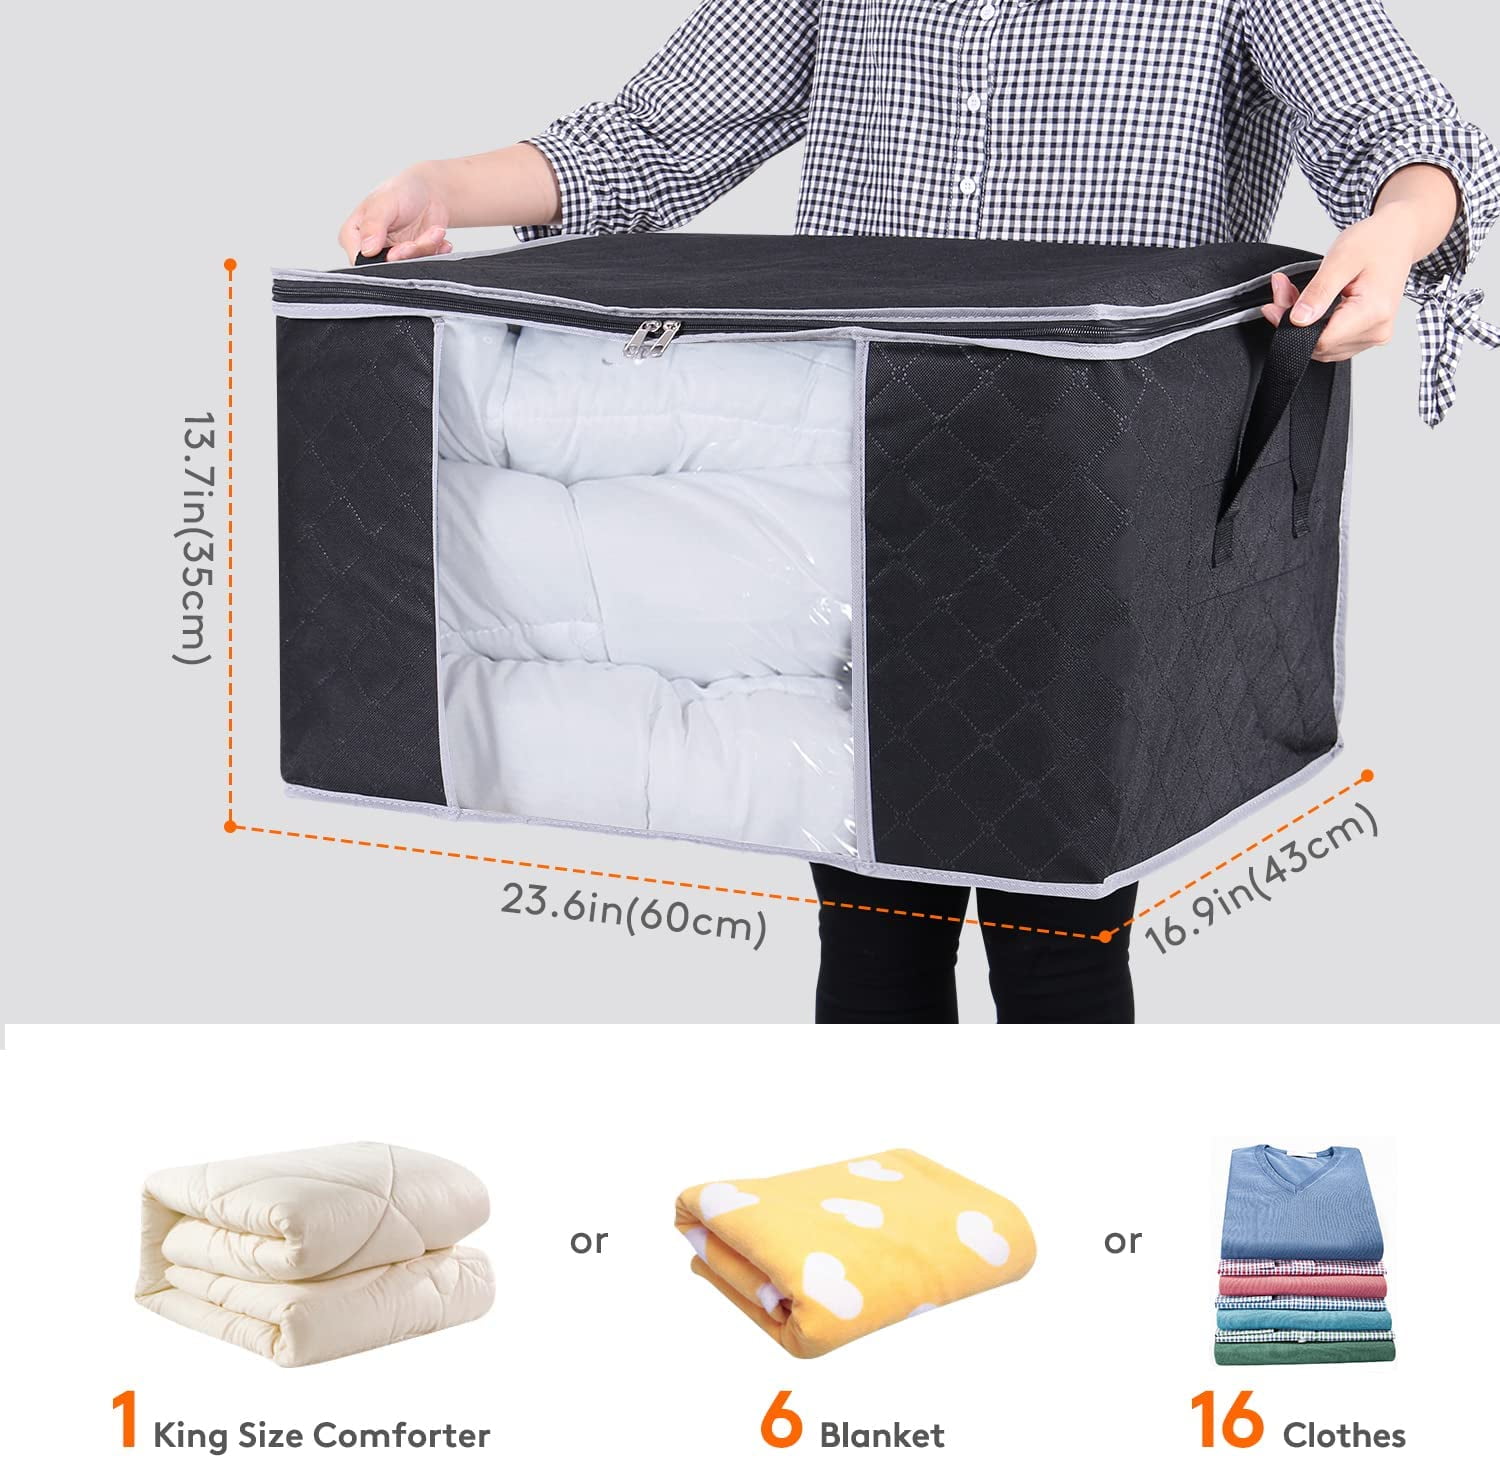 Clothes Storage Bags, Foldable, Clear Window - Lifewit – Lifewitstore